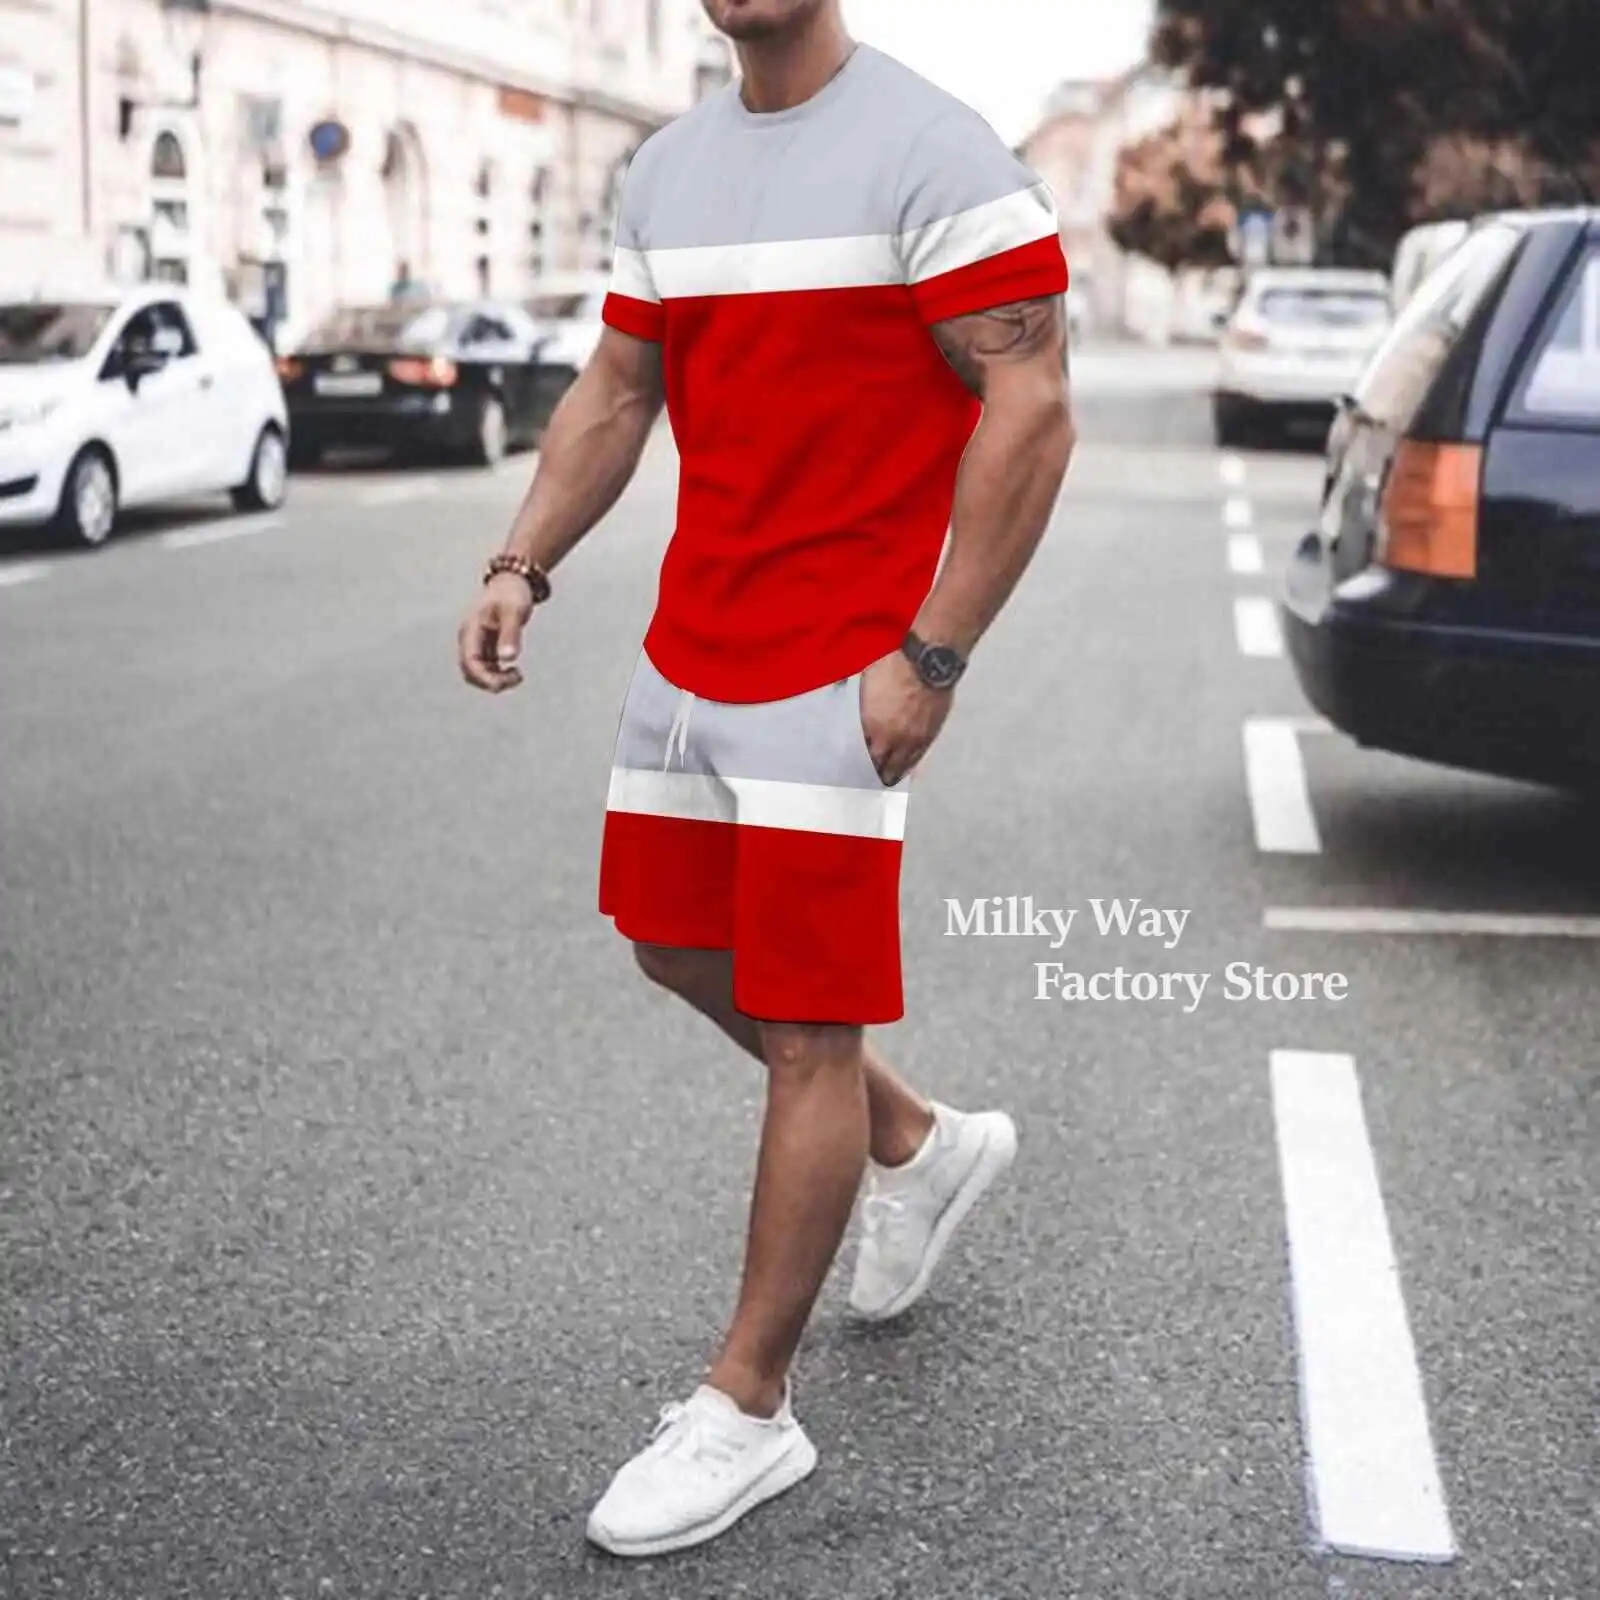 Men's Solid Color Tracksuit T-Shirt Shorts Set Casual Outfits Male Sports Jogging Suit Fashion Clothing StreetwearNew Summer